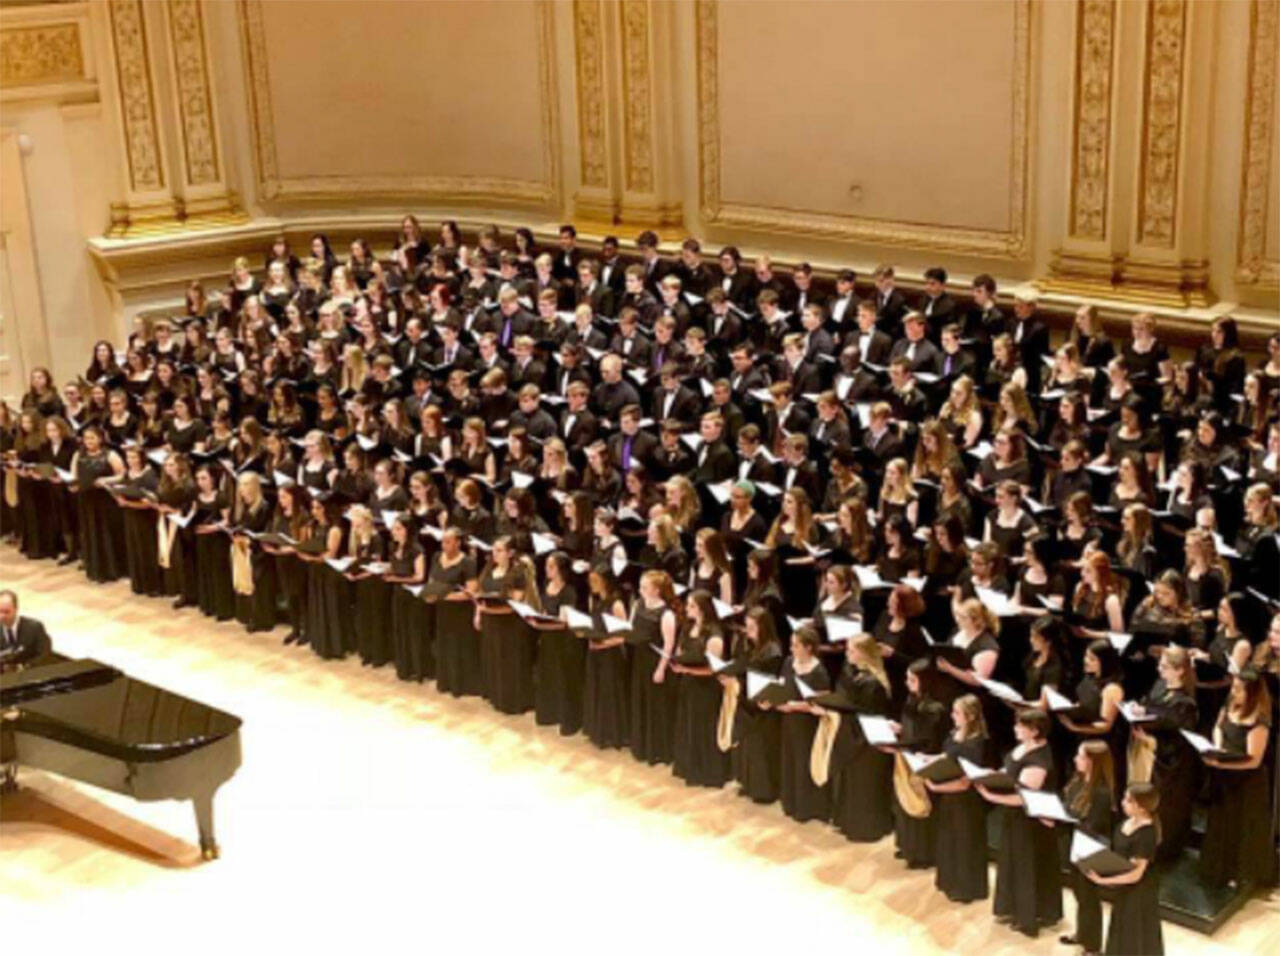 NKHS choir performing at Carnegie Hall in 2019. File Photo